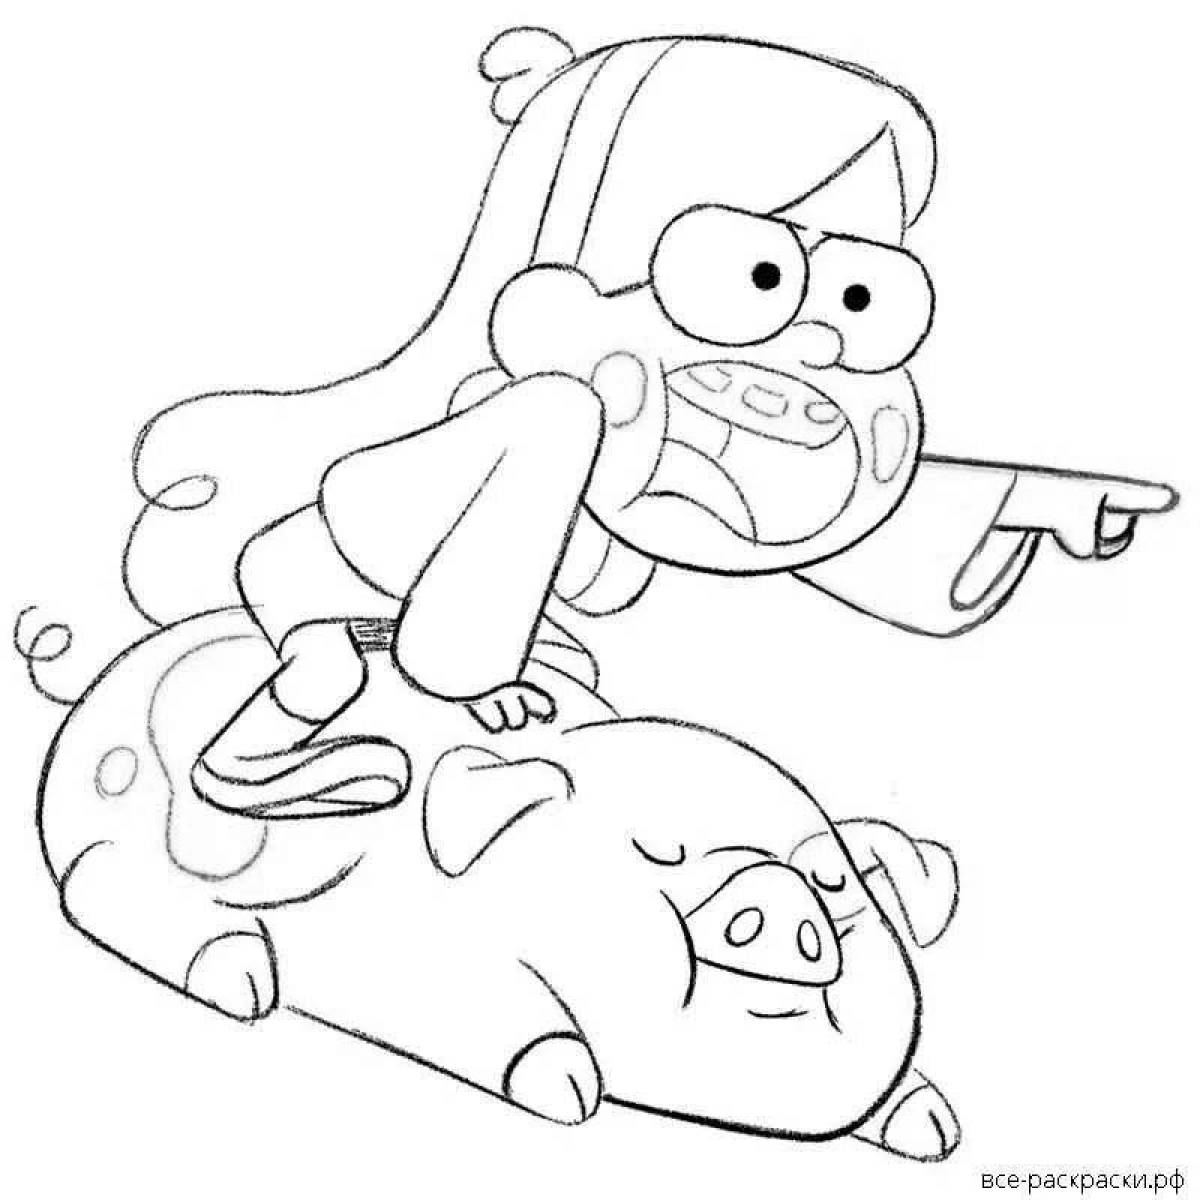 Sweet mabel and chubby coloring